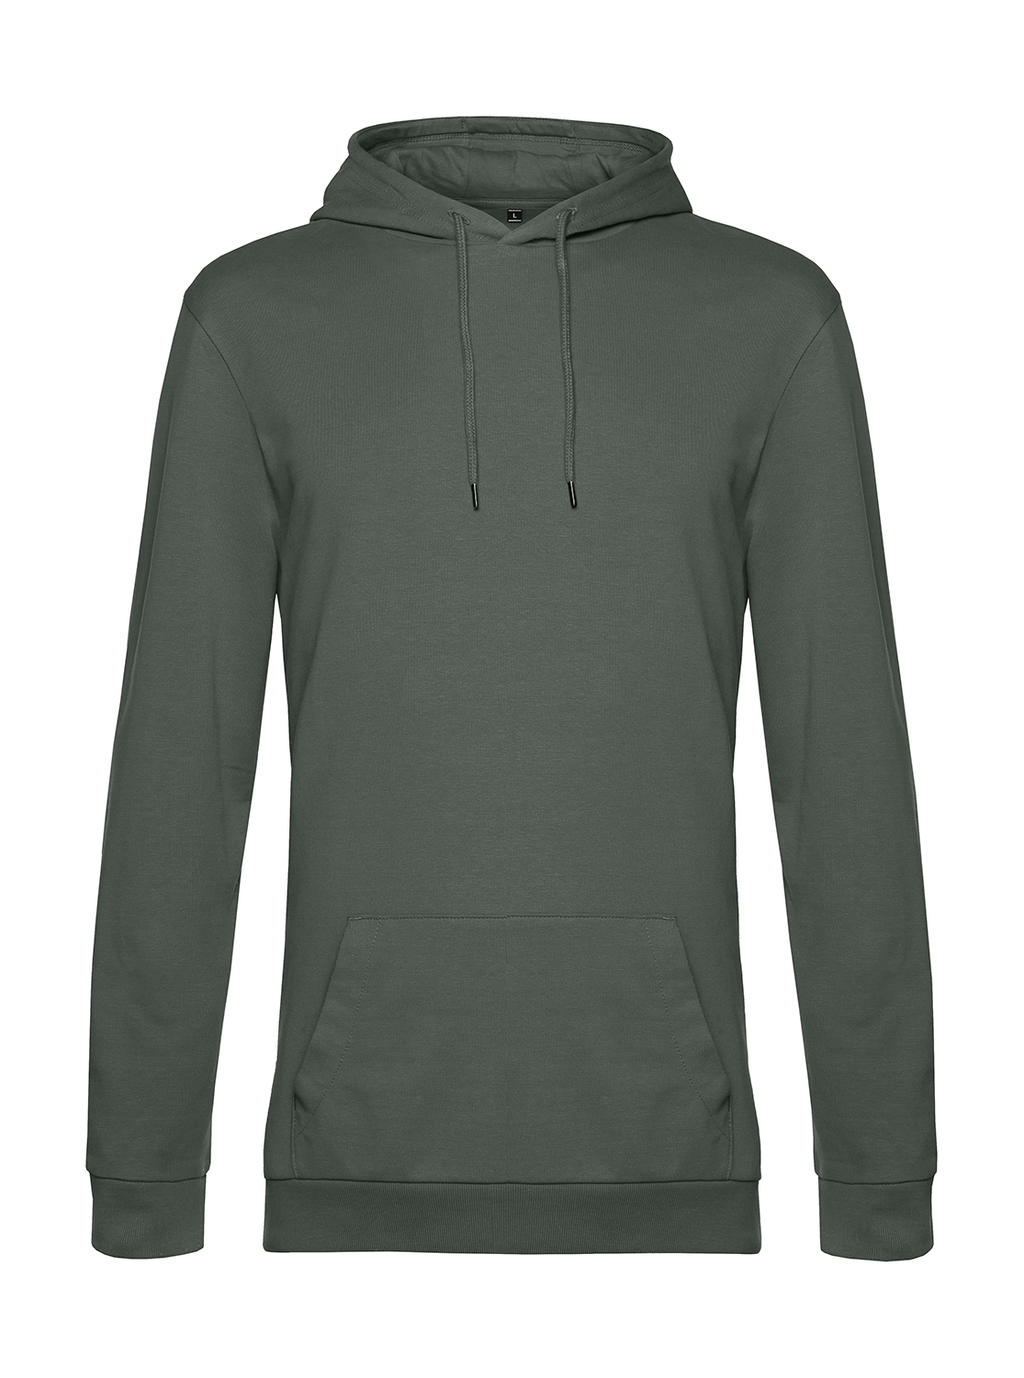  #Hoodie French Terry in Farbe Millennial Khaki